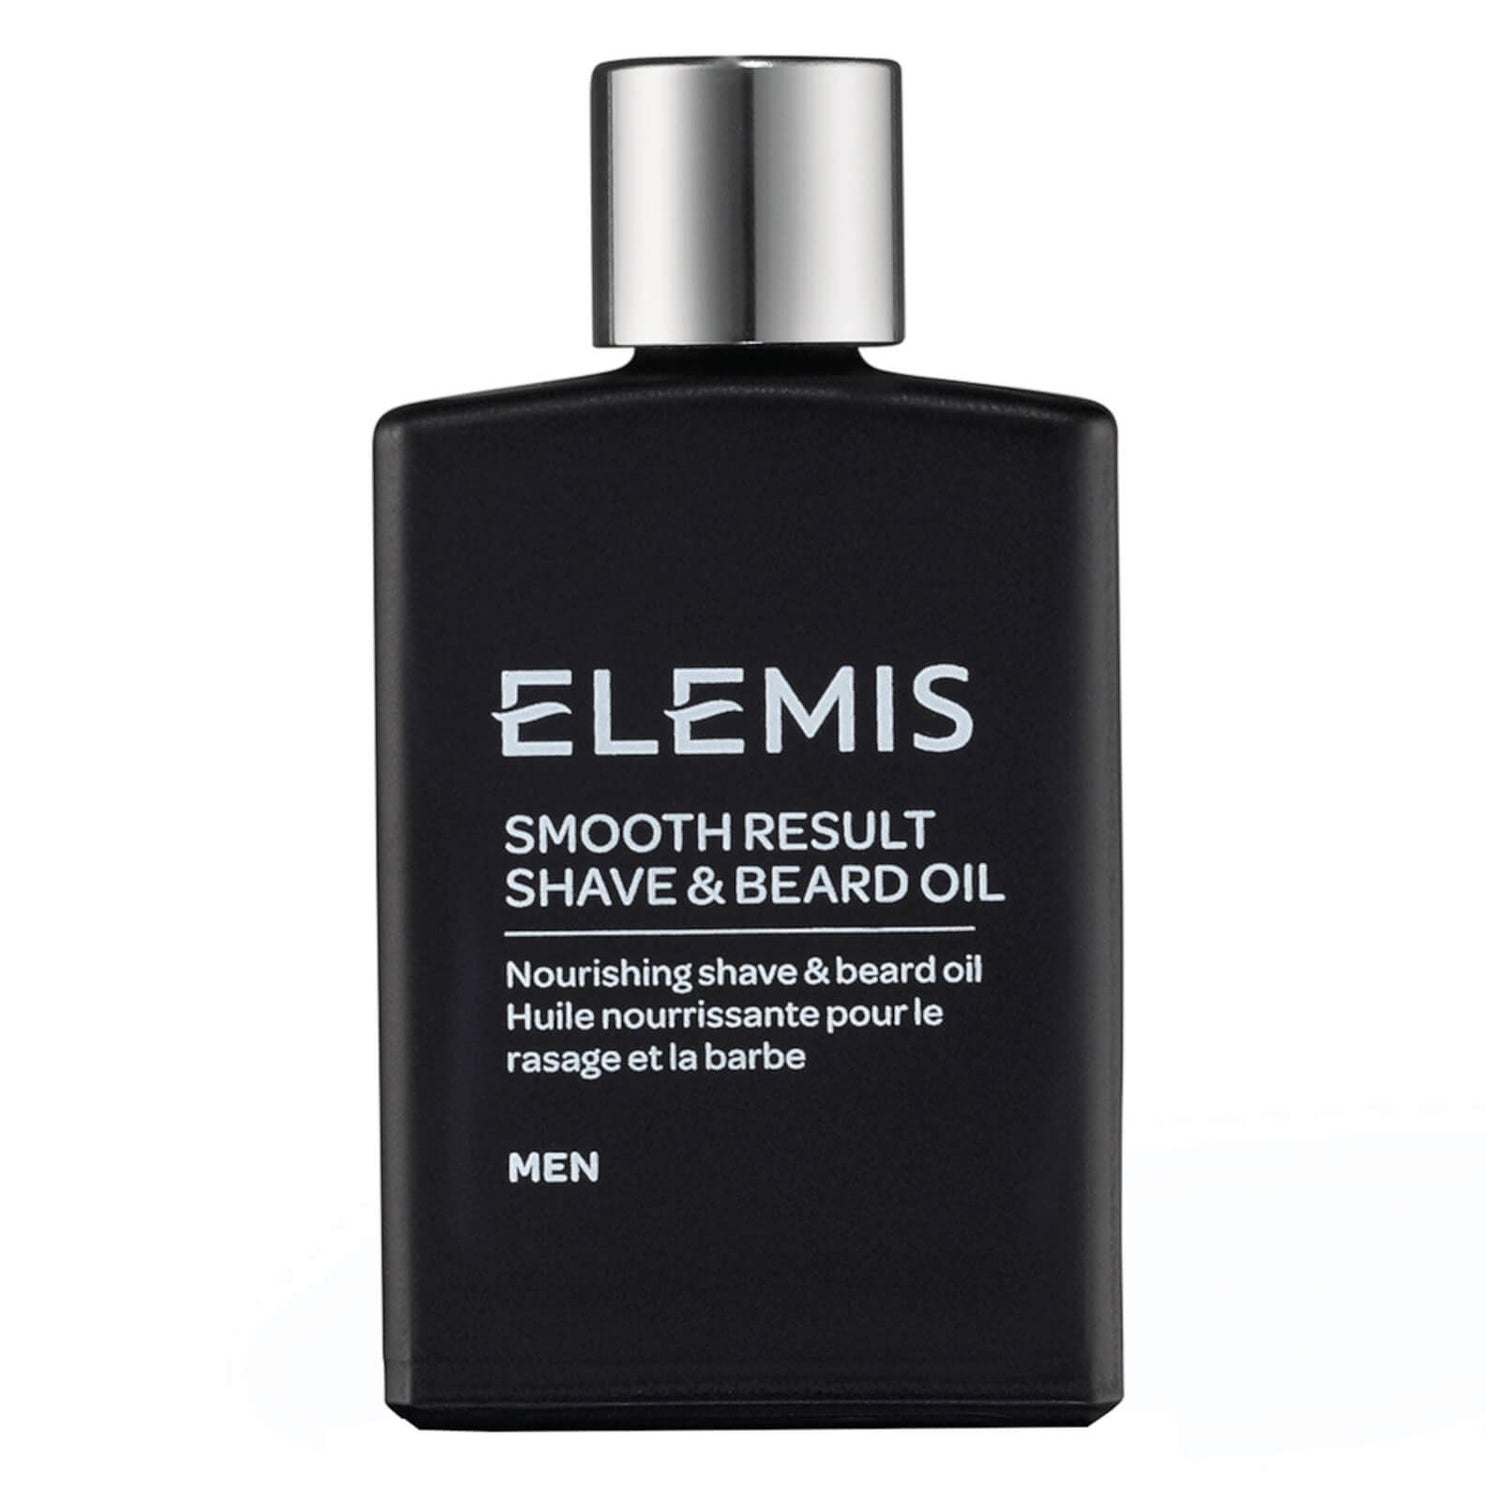 Elemis Smooth Result Shave and Beard Oil - 30ml